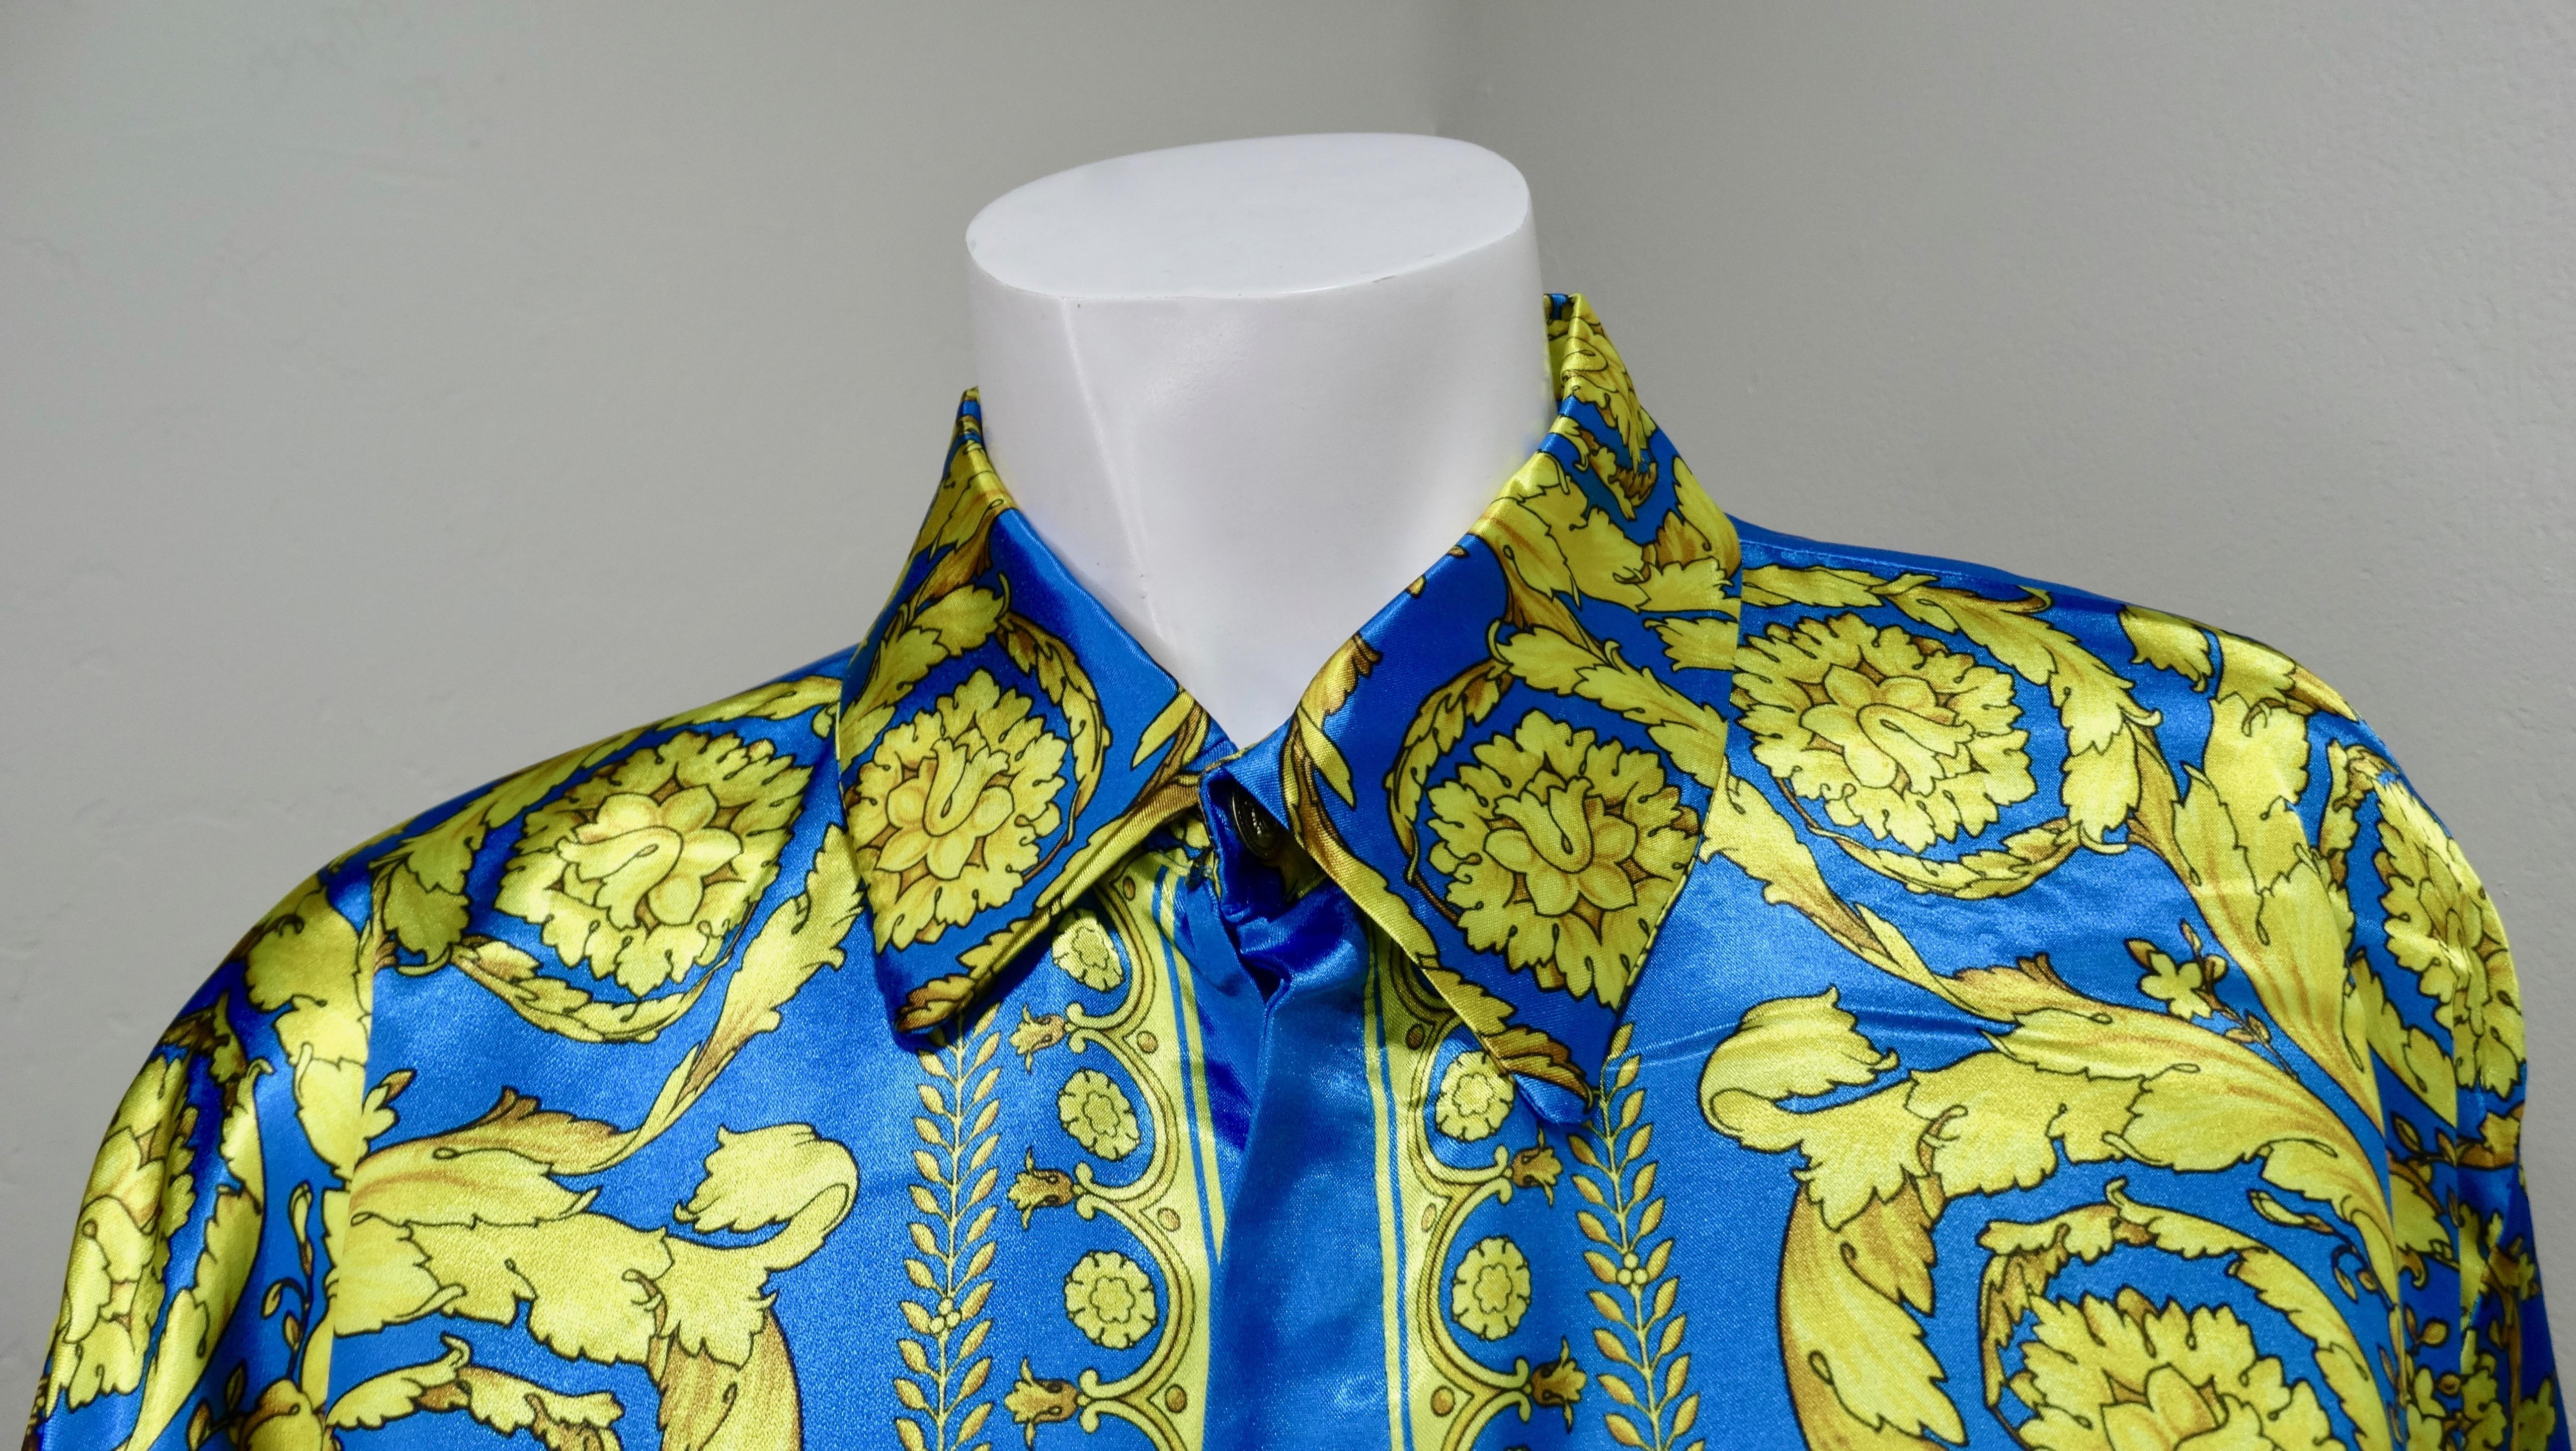 Snag yourself a piece from the Versace archives! Circa 1990s, this shiny electric blue and gold Silk button down shirt features one of Versace's signature Baroque designs mixed with floral arrangements and crowns. Includes a hidden button closure